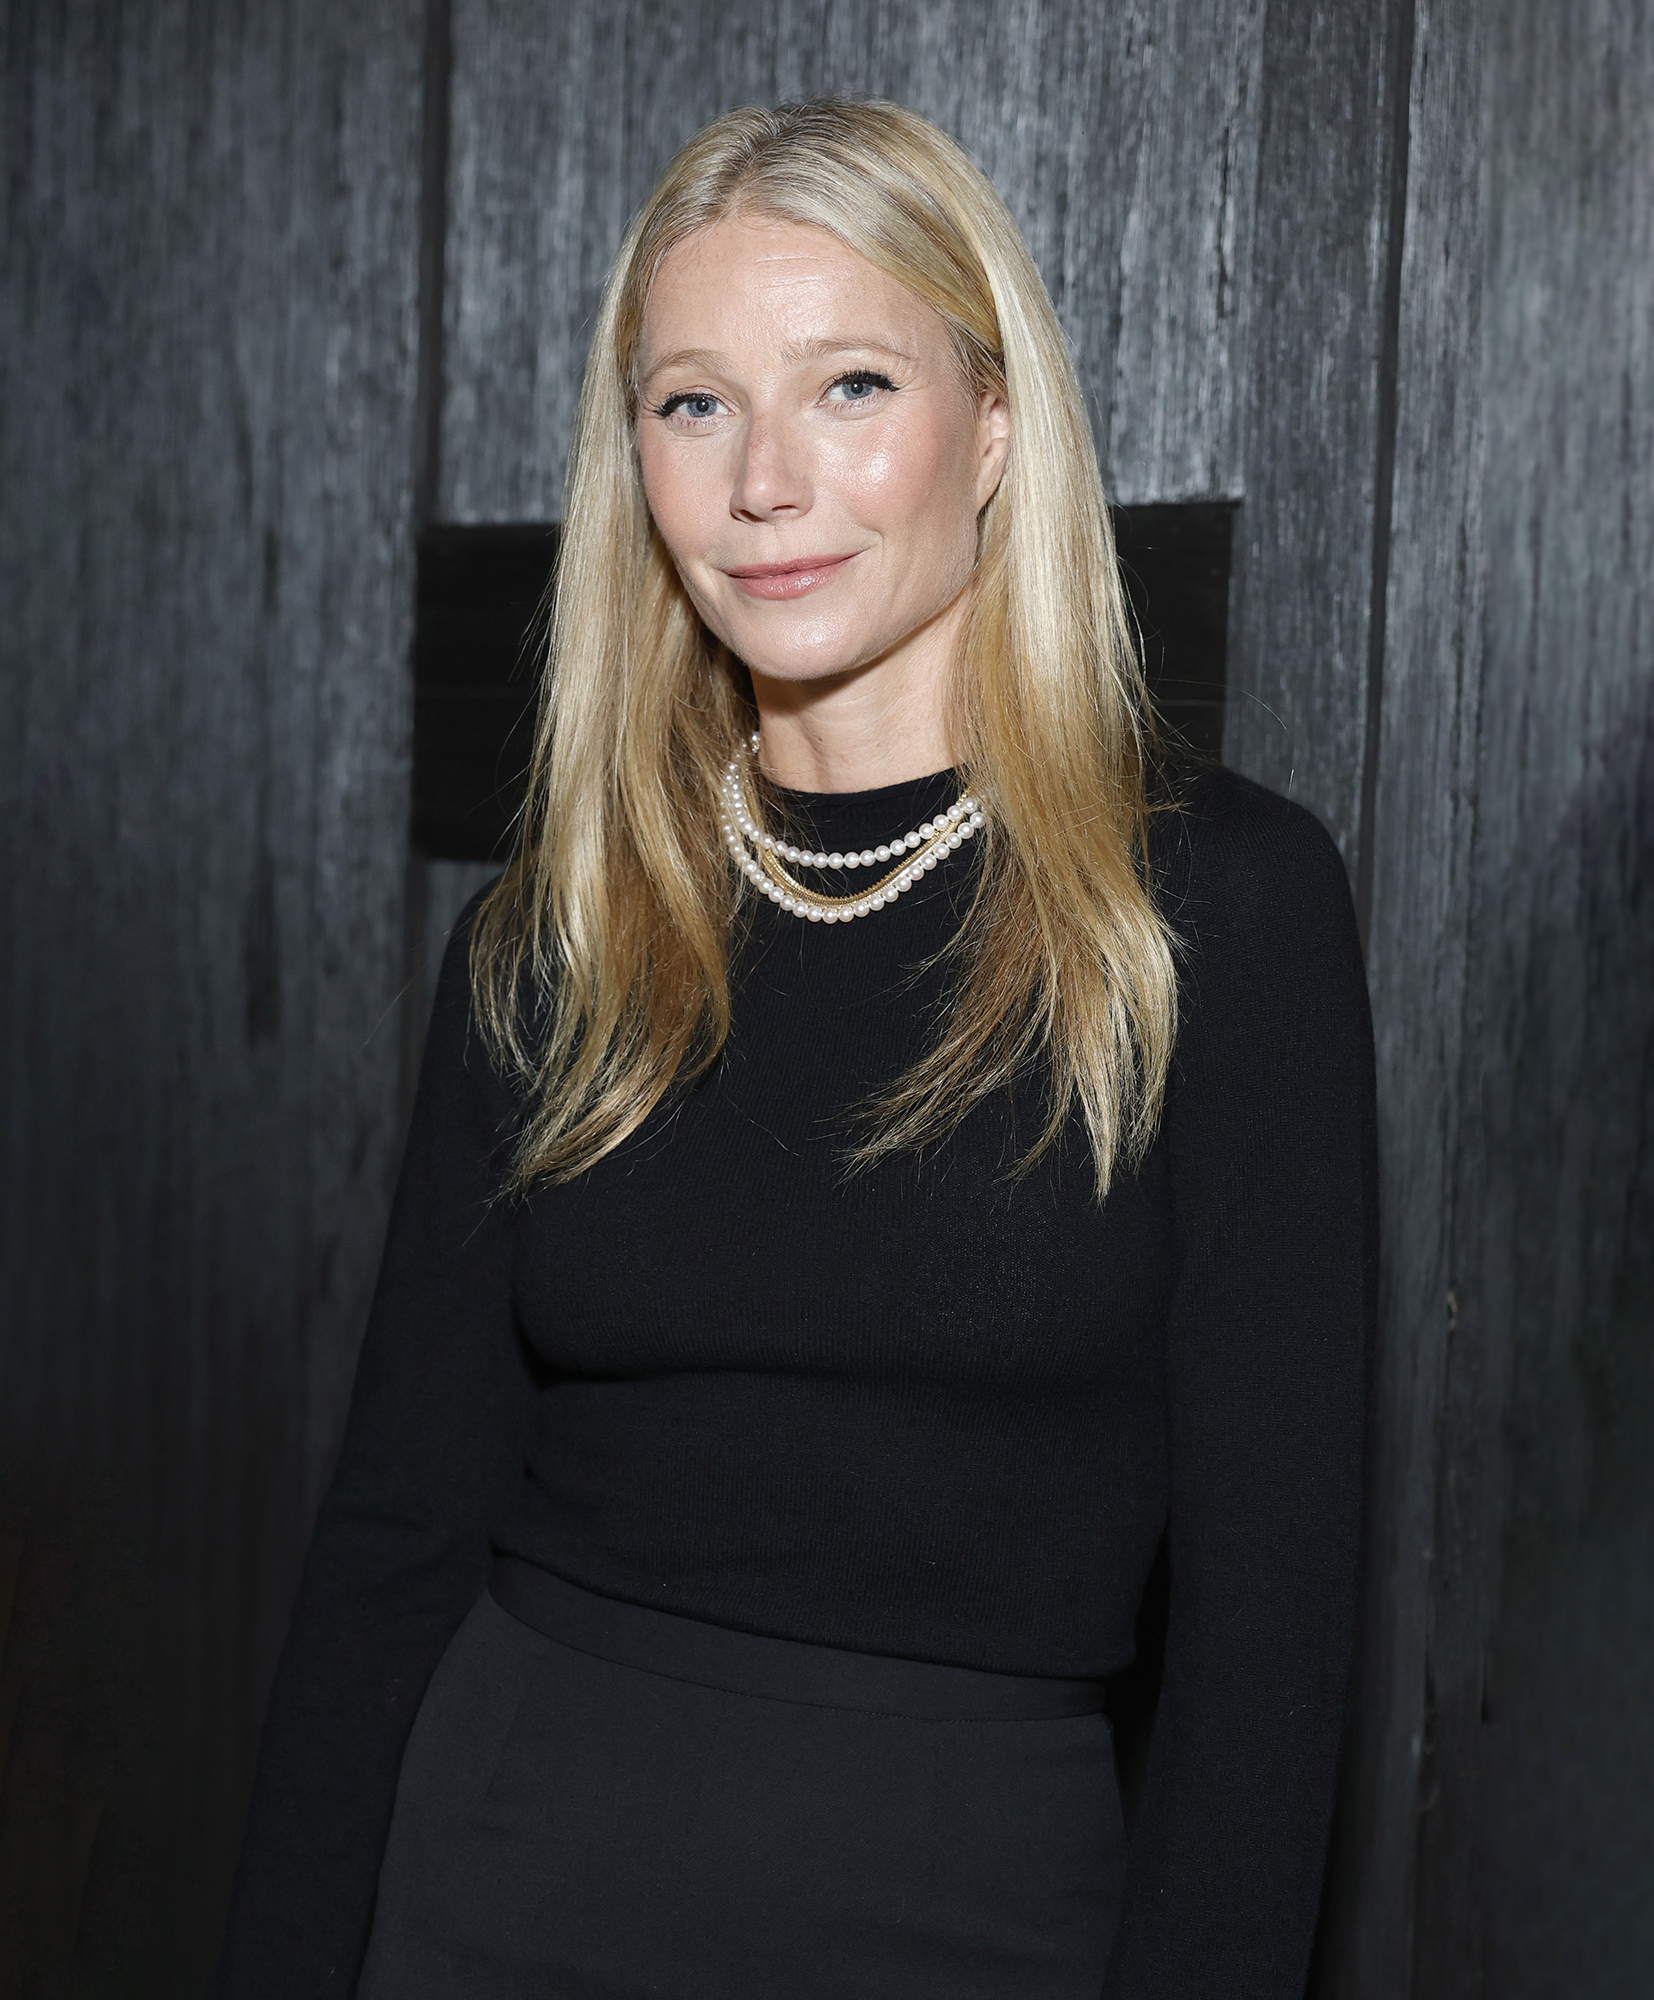 Gwyneth Paltrow Says Her Late Fathers Cancer Battle Inspired Her Foray Into Wellness 